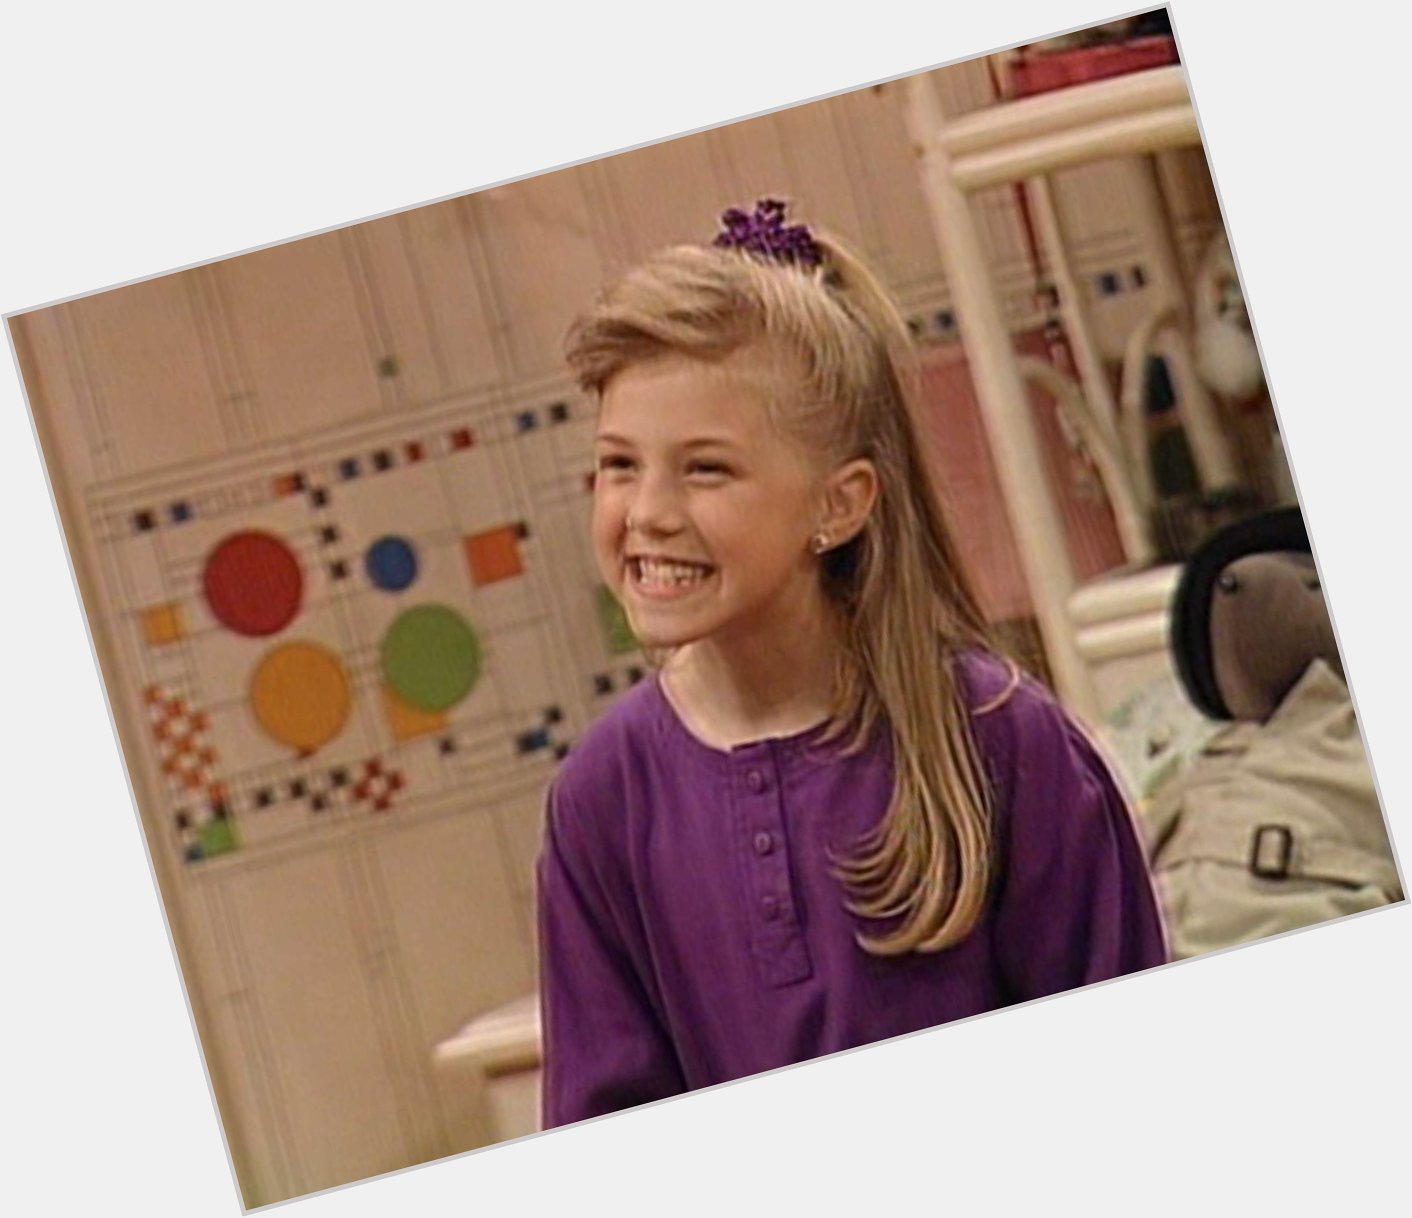 Happy Birthday to Jodie Sweetin, who many of you know as Stephanie Tanner from Full House and Fuller House! 